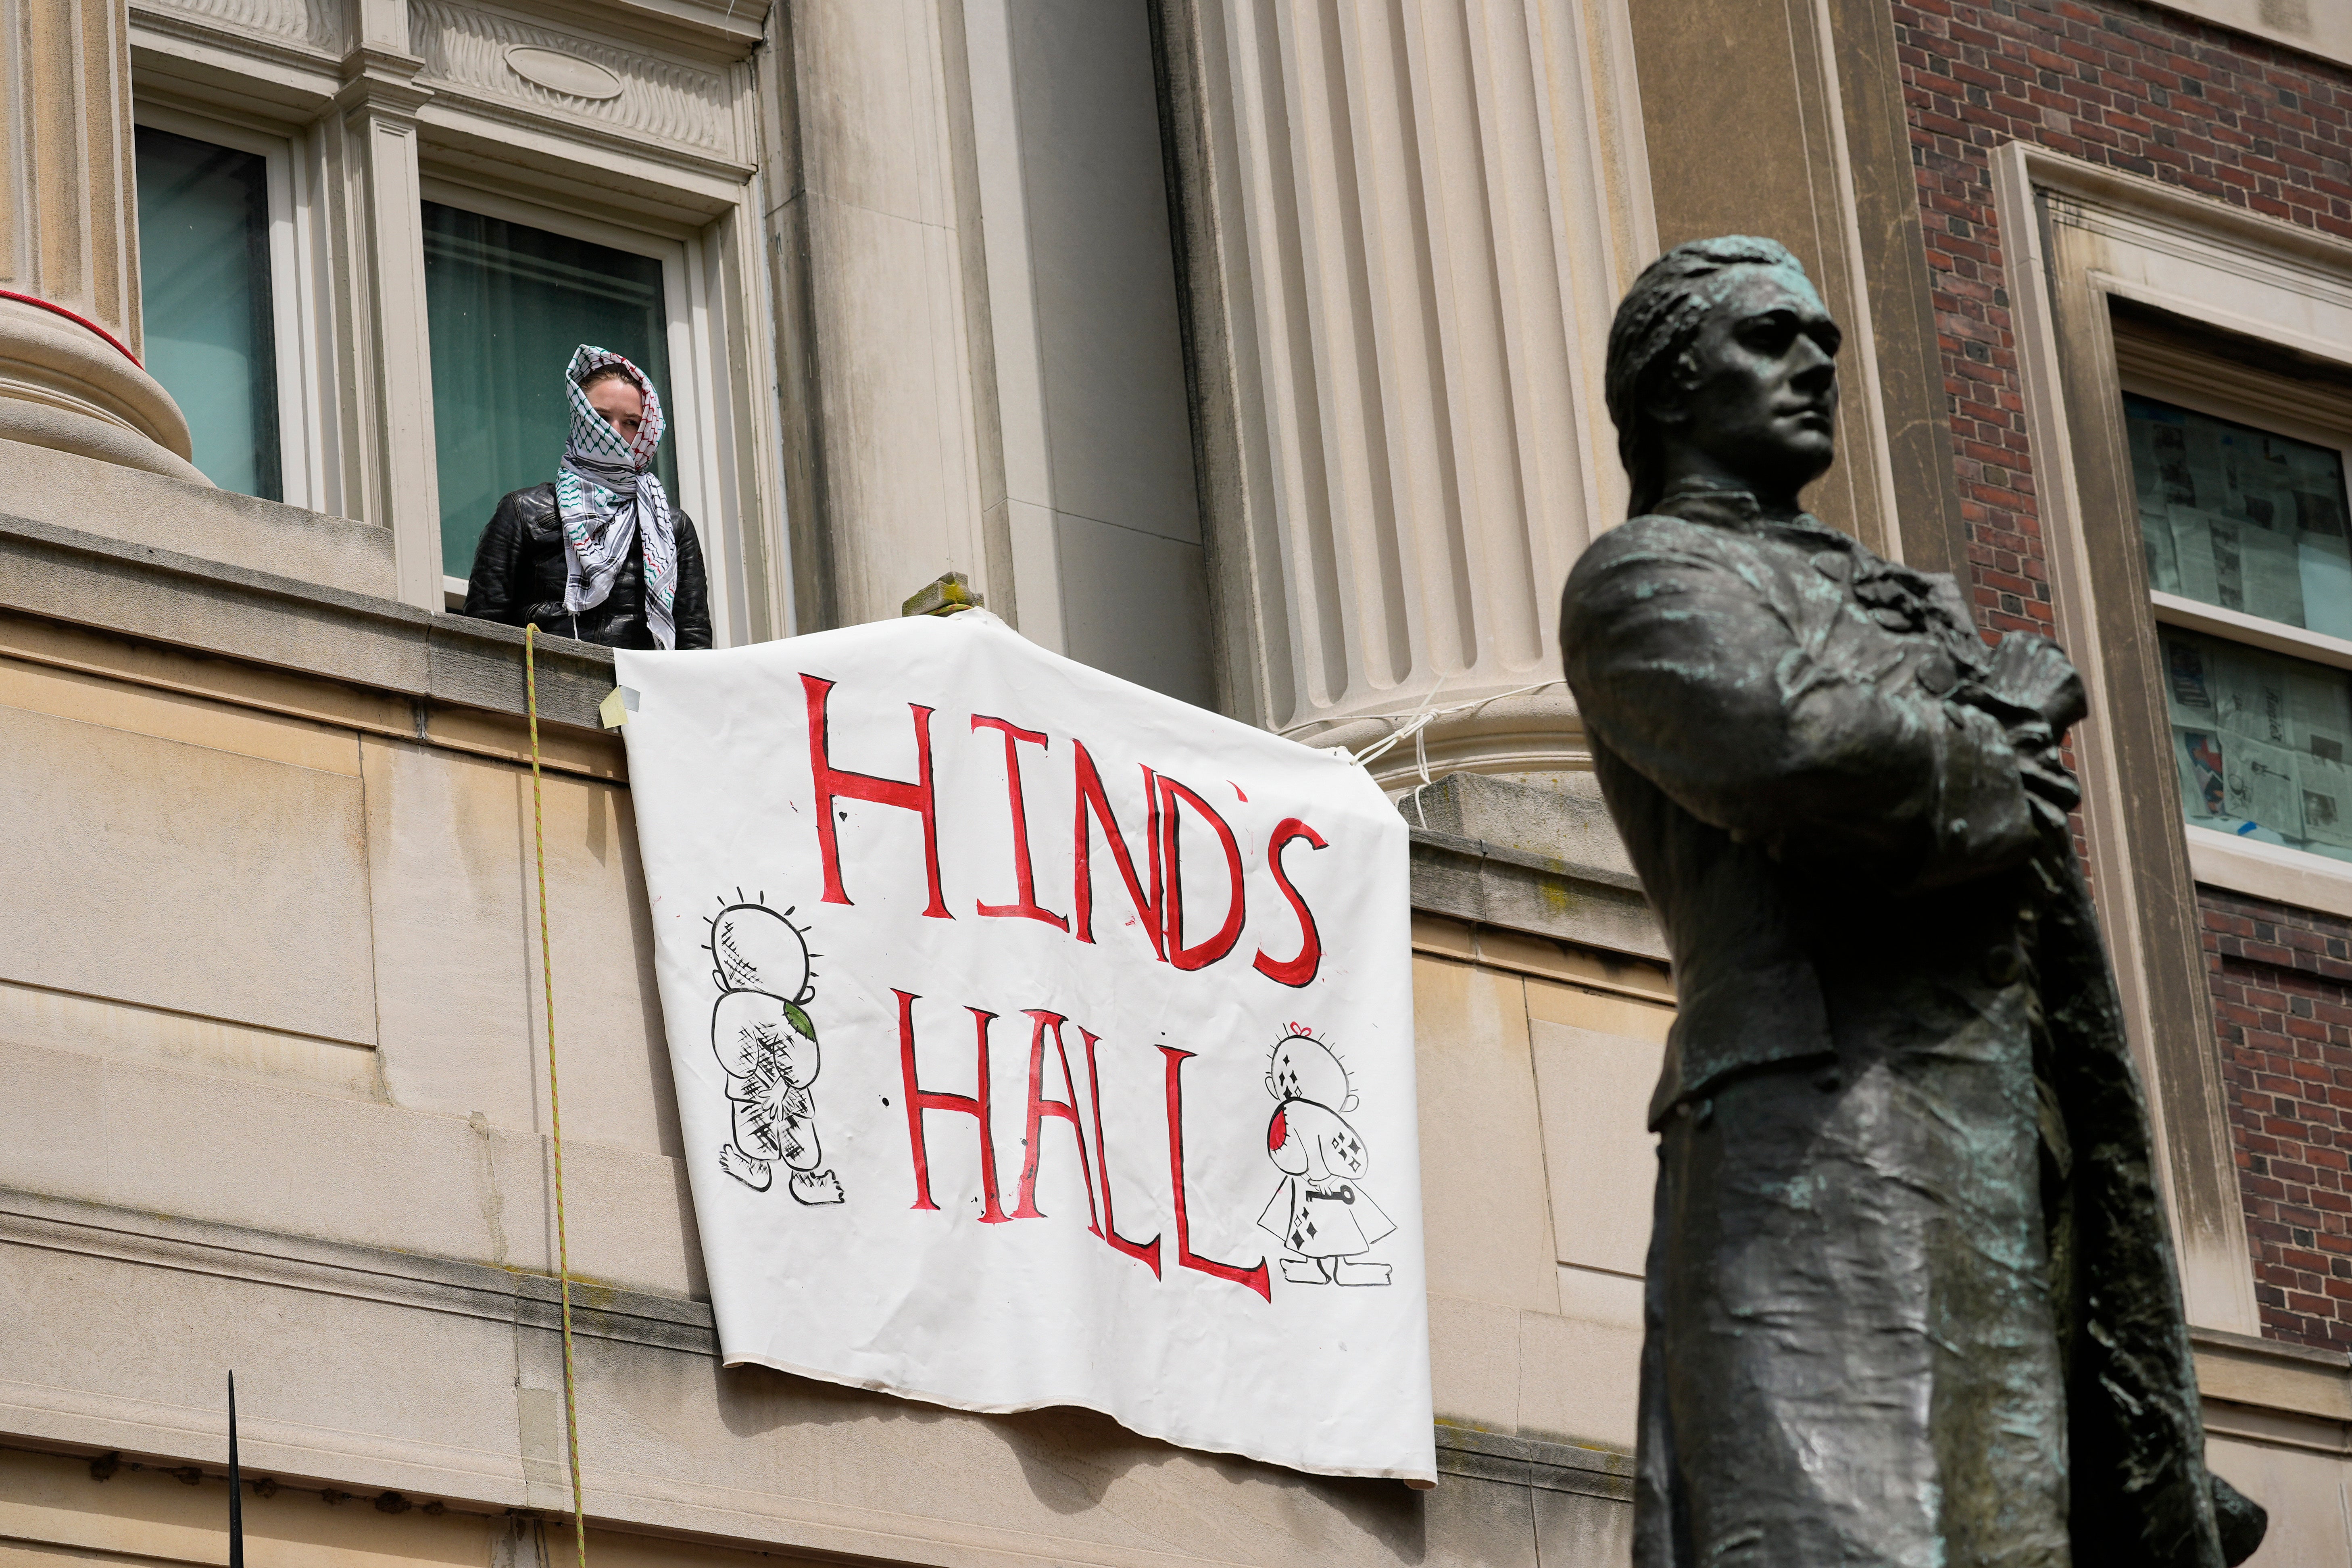 Student protesters at Columbia renamed Hamilton Hall in Hind’s memory after staging an occupation of the building